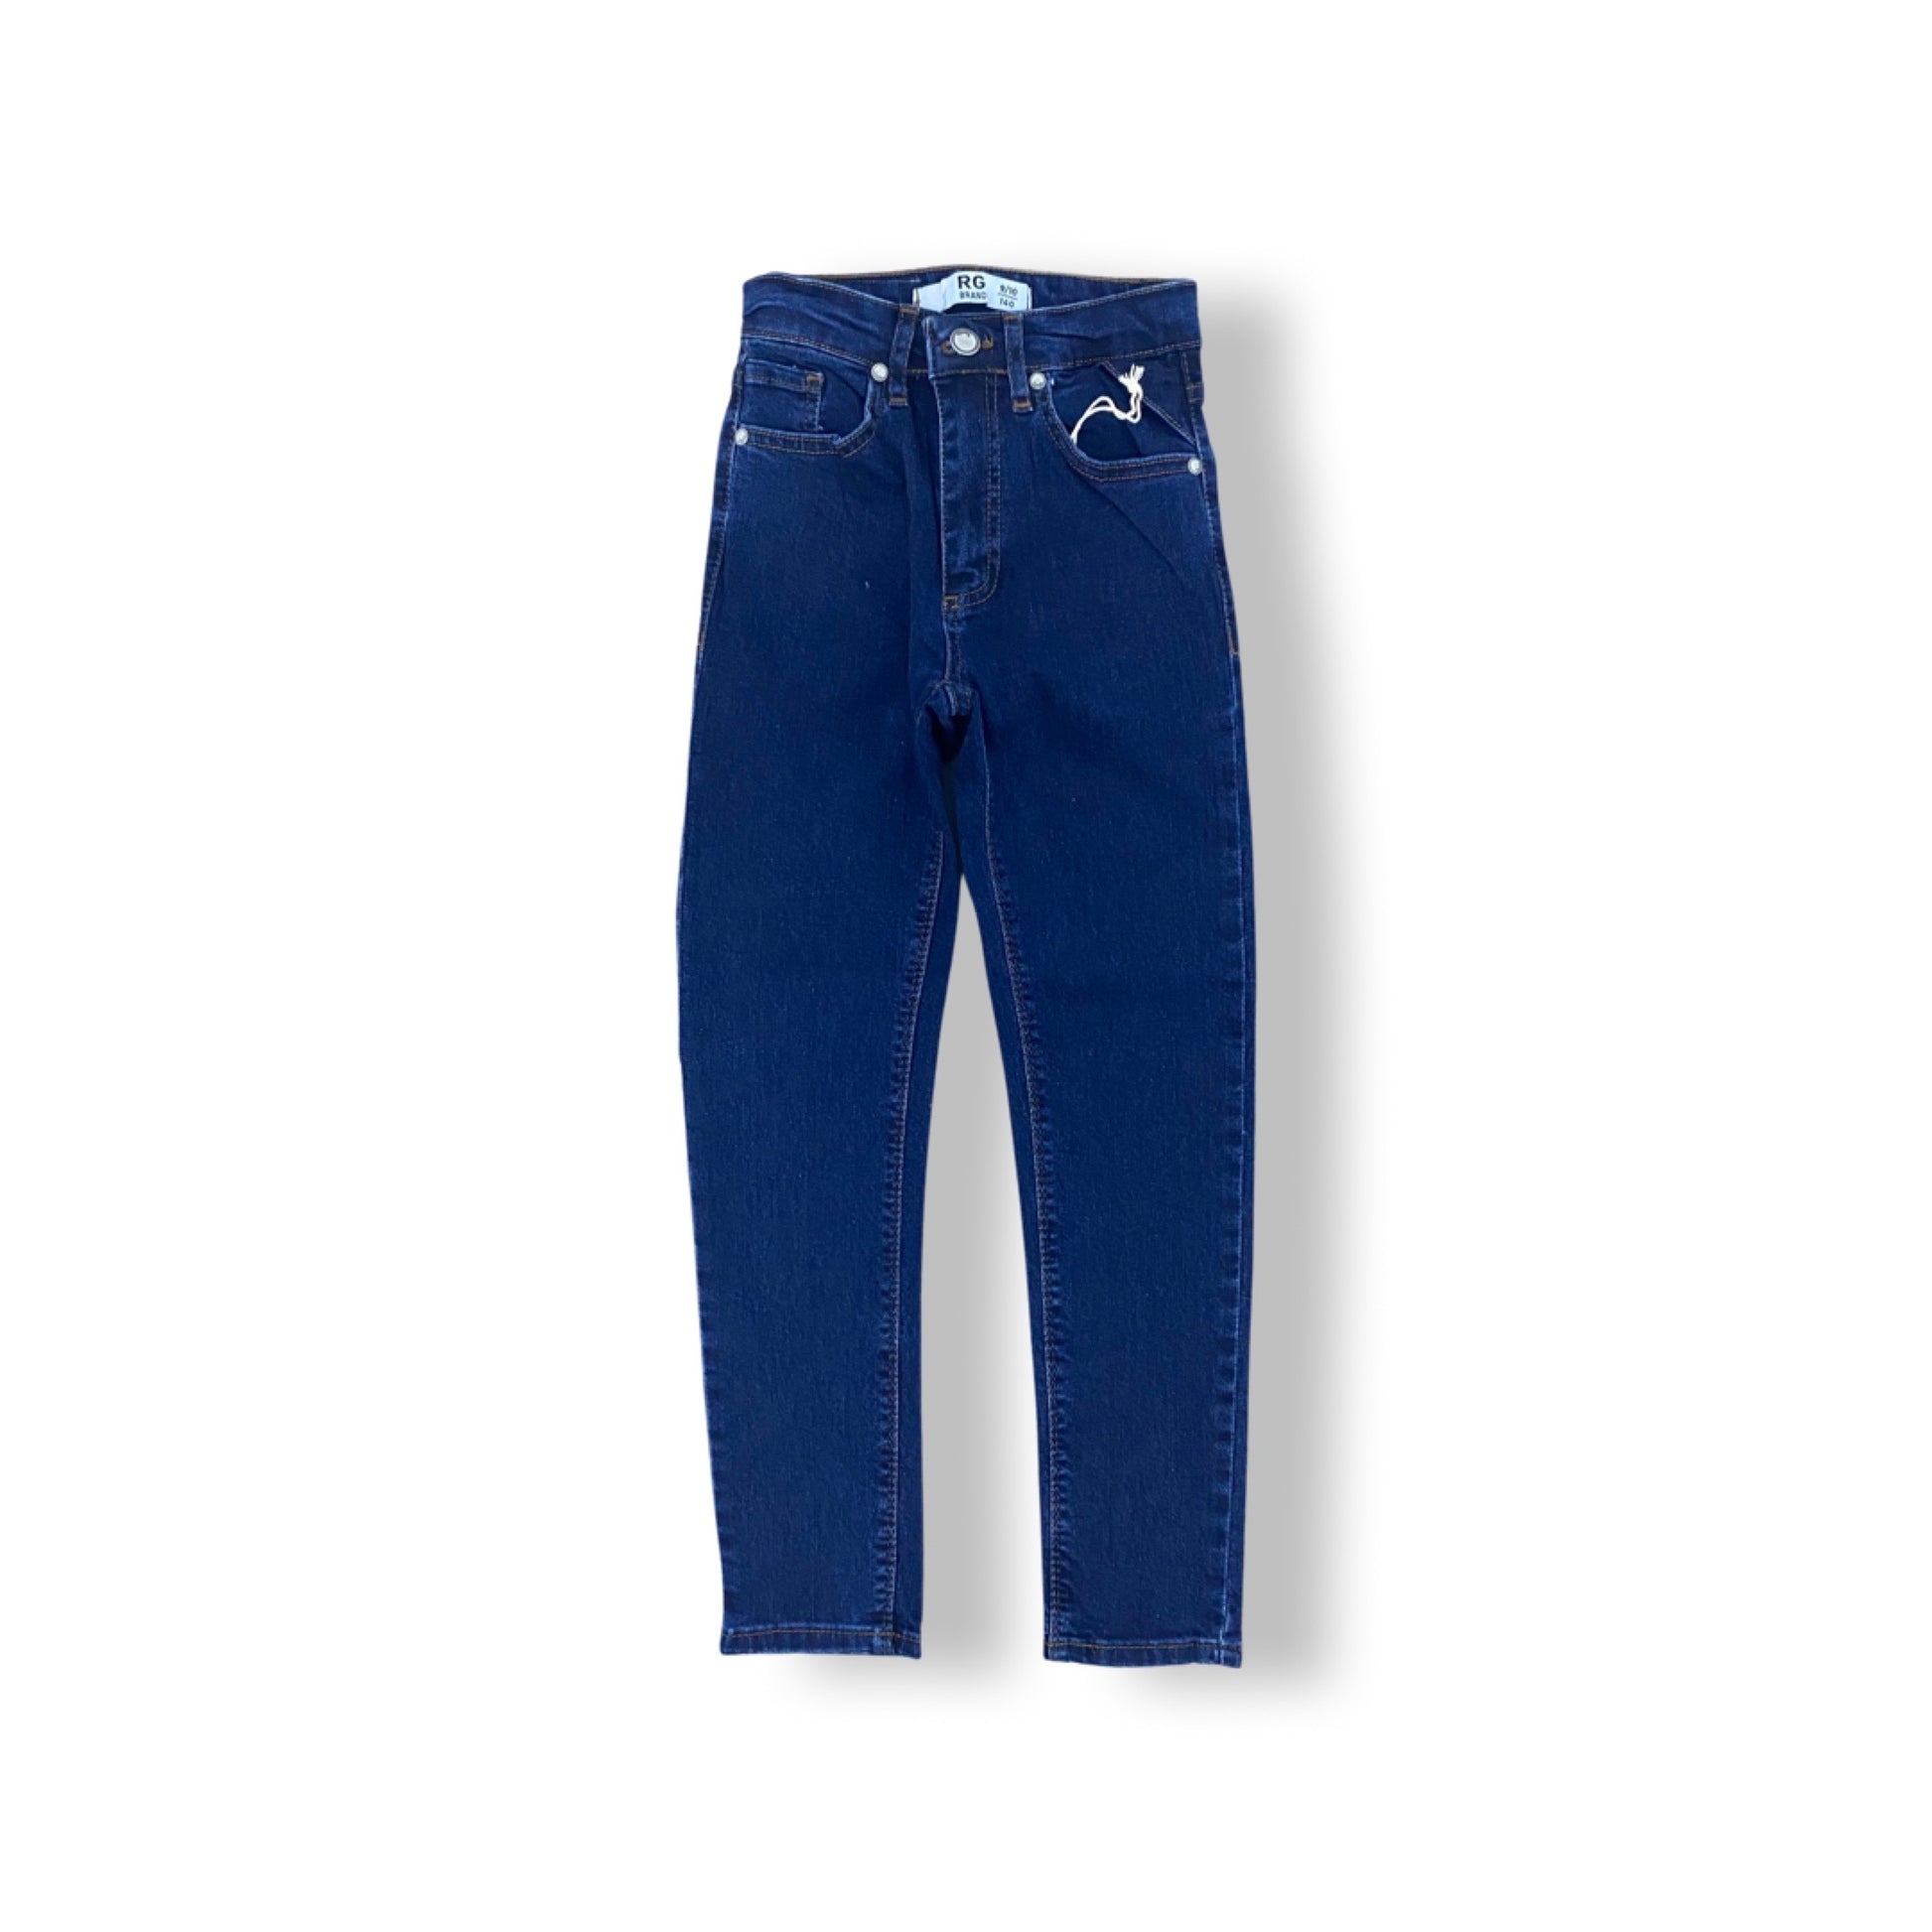 Unisex Young Jeans Dark Blue